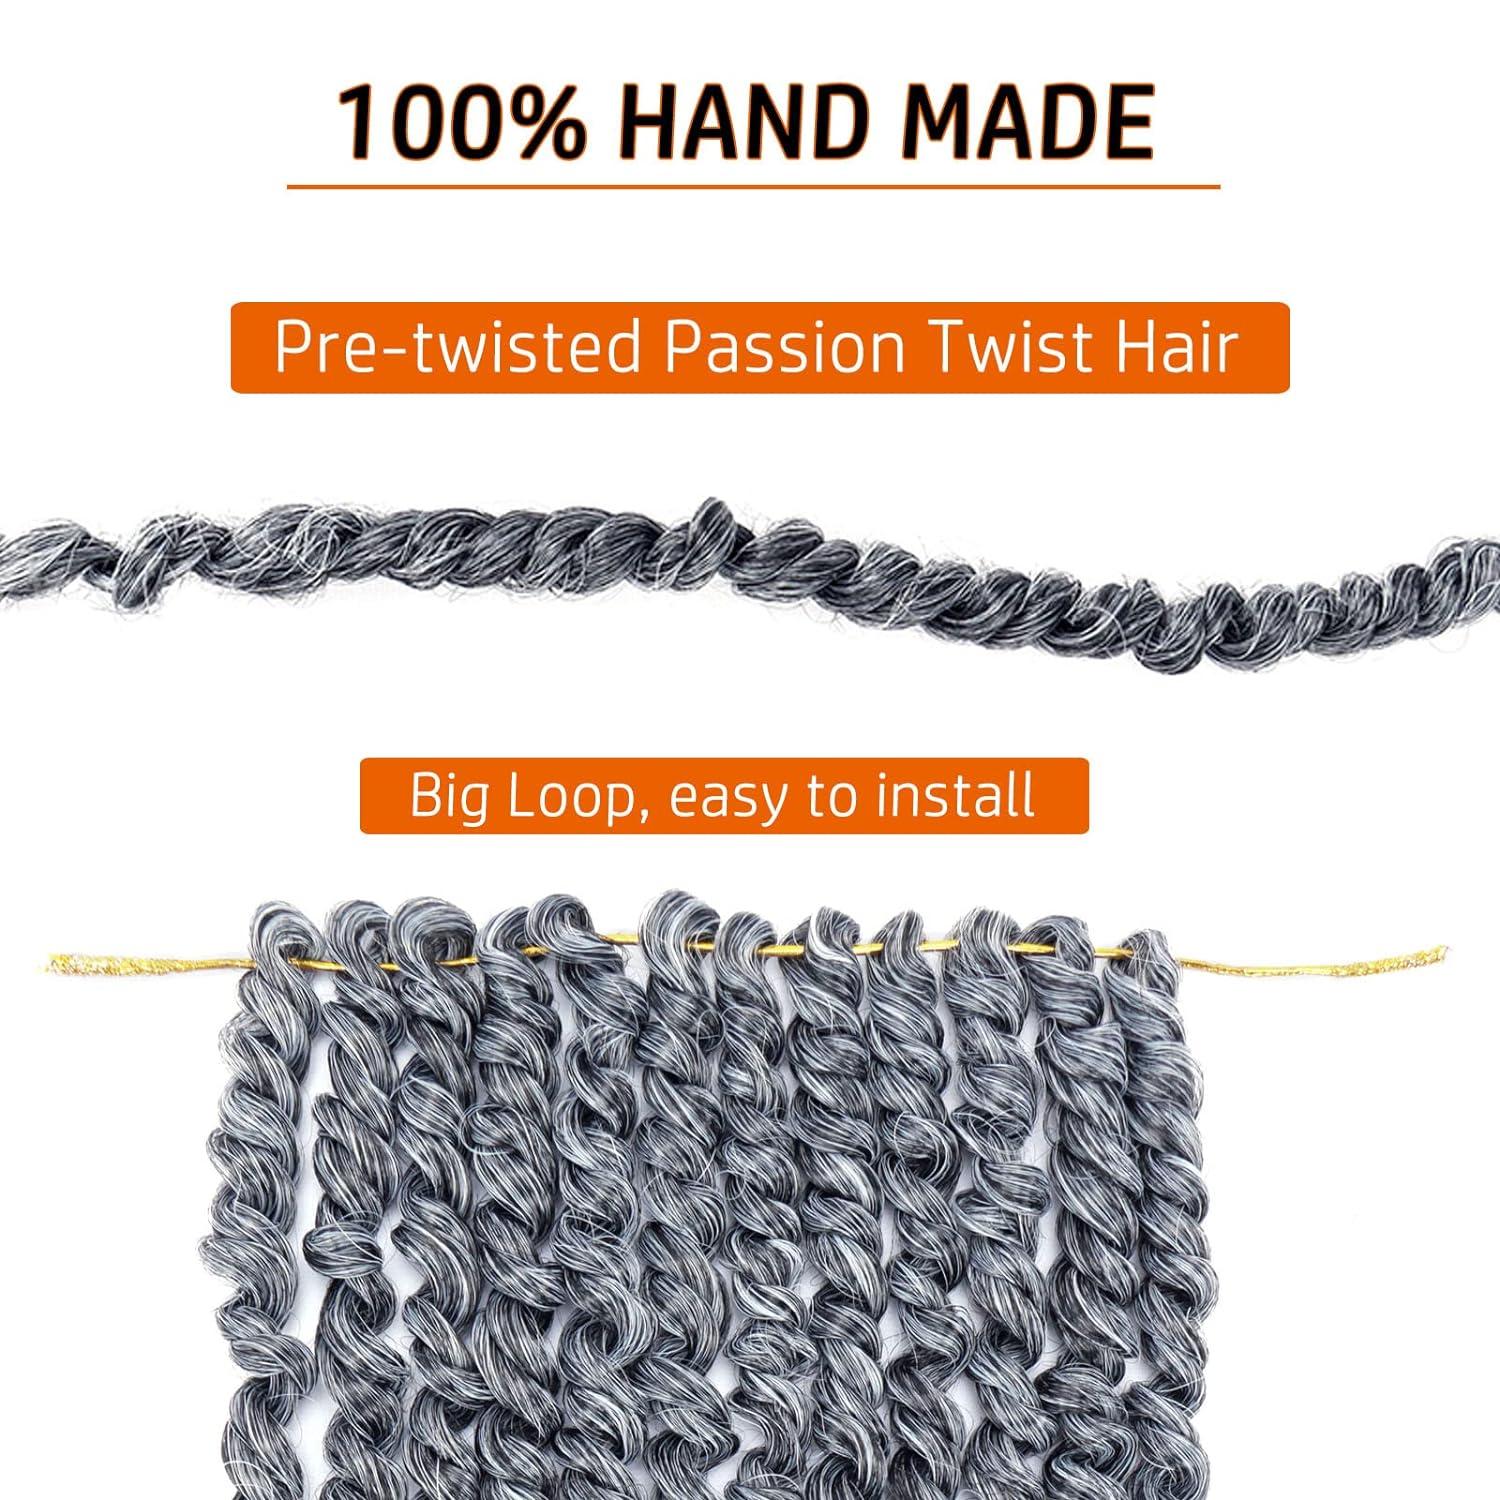 Dorsanee Pre-twisted Passion Twist Hair 10 Inch 8 packs Short Passion Twist  Crochet Hair Pre-looped Crochet Braids for Women Gray Passion Twists  Synthetic Curly Crochet Hair Extensions (1B/Gray) 10 Inch (Pack of